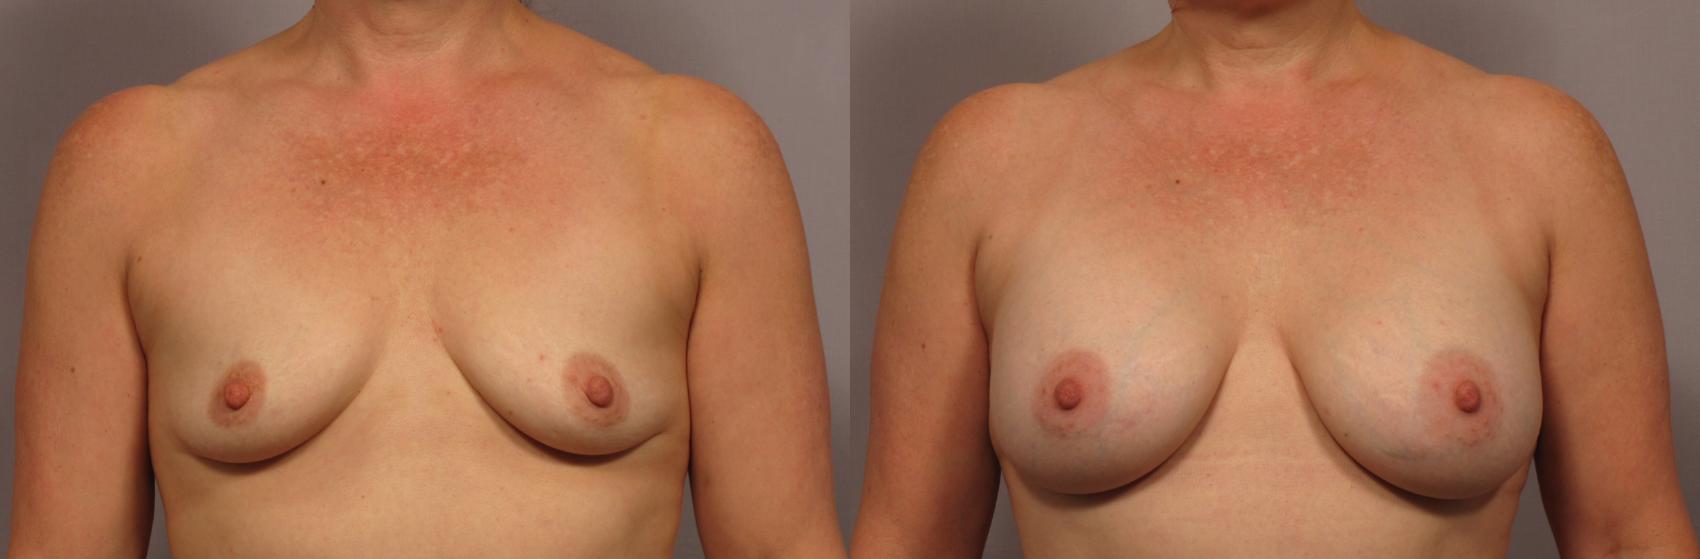 Breast Augmentation Photos from Front View